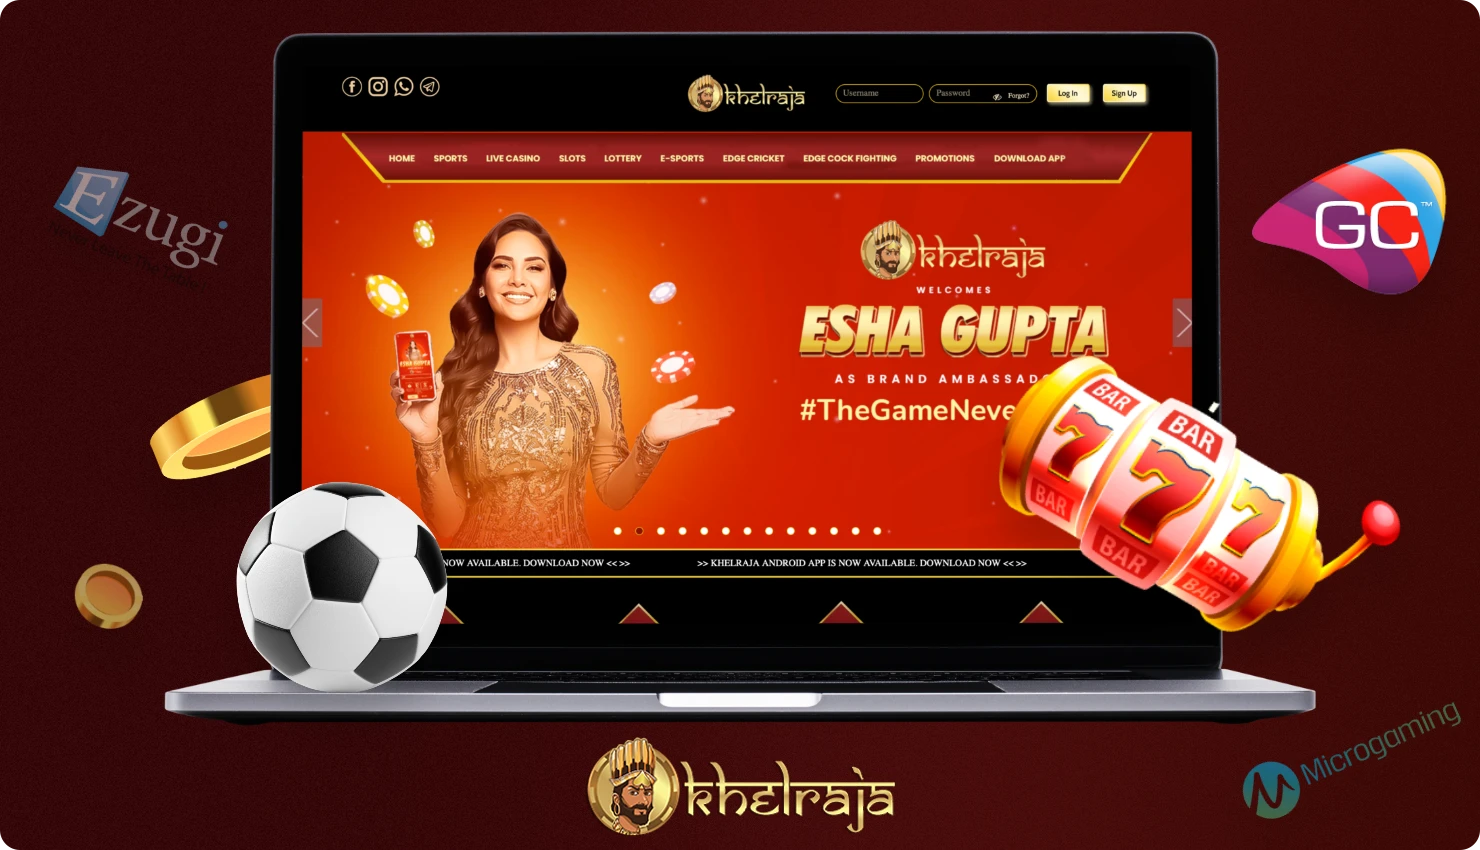 Khelraja provides its Indian customers with sports betting and gambling, including casinos